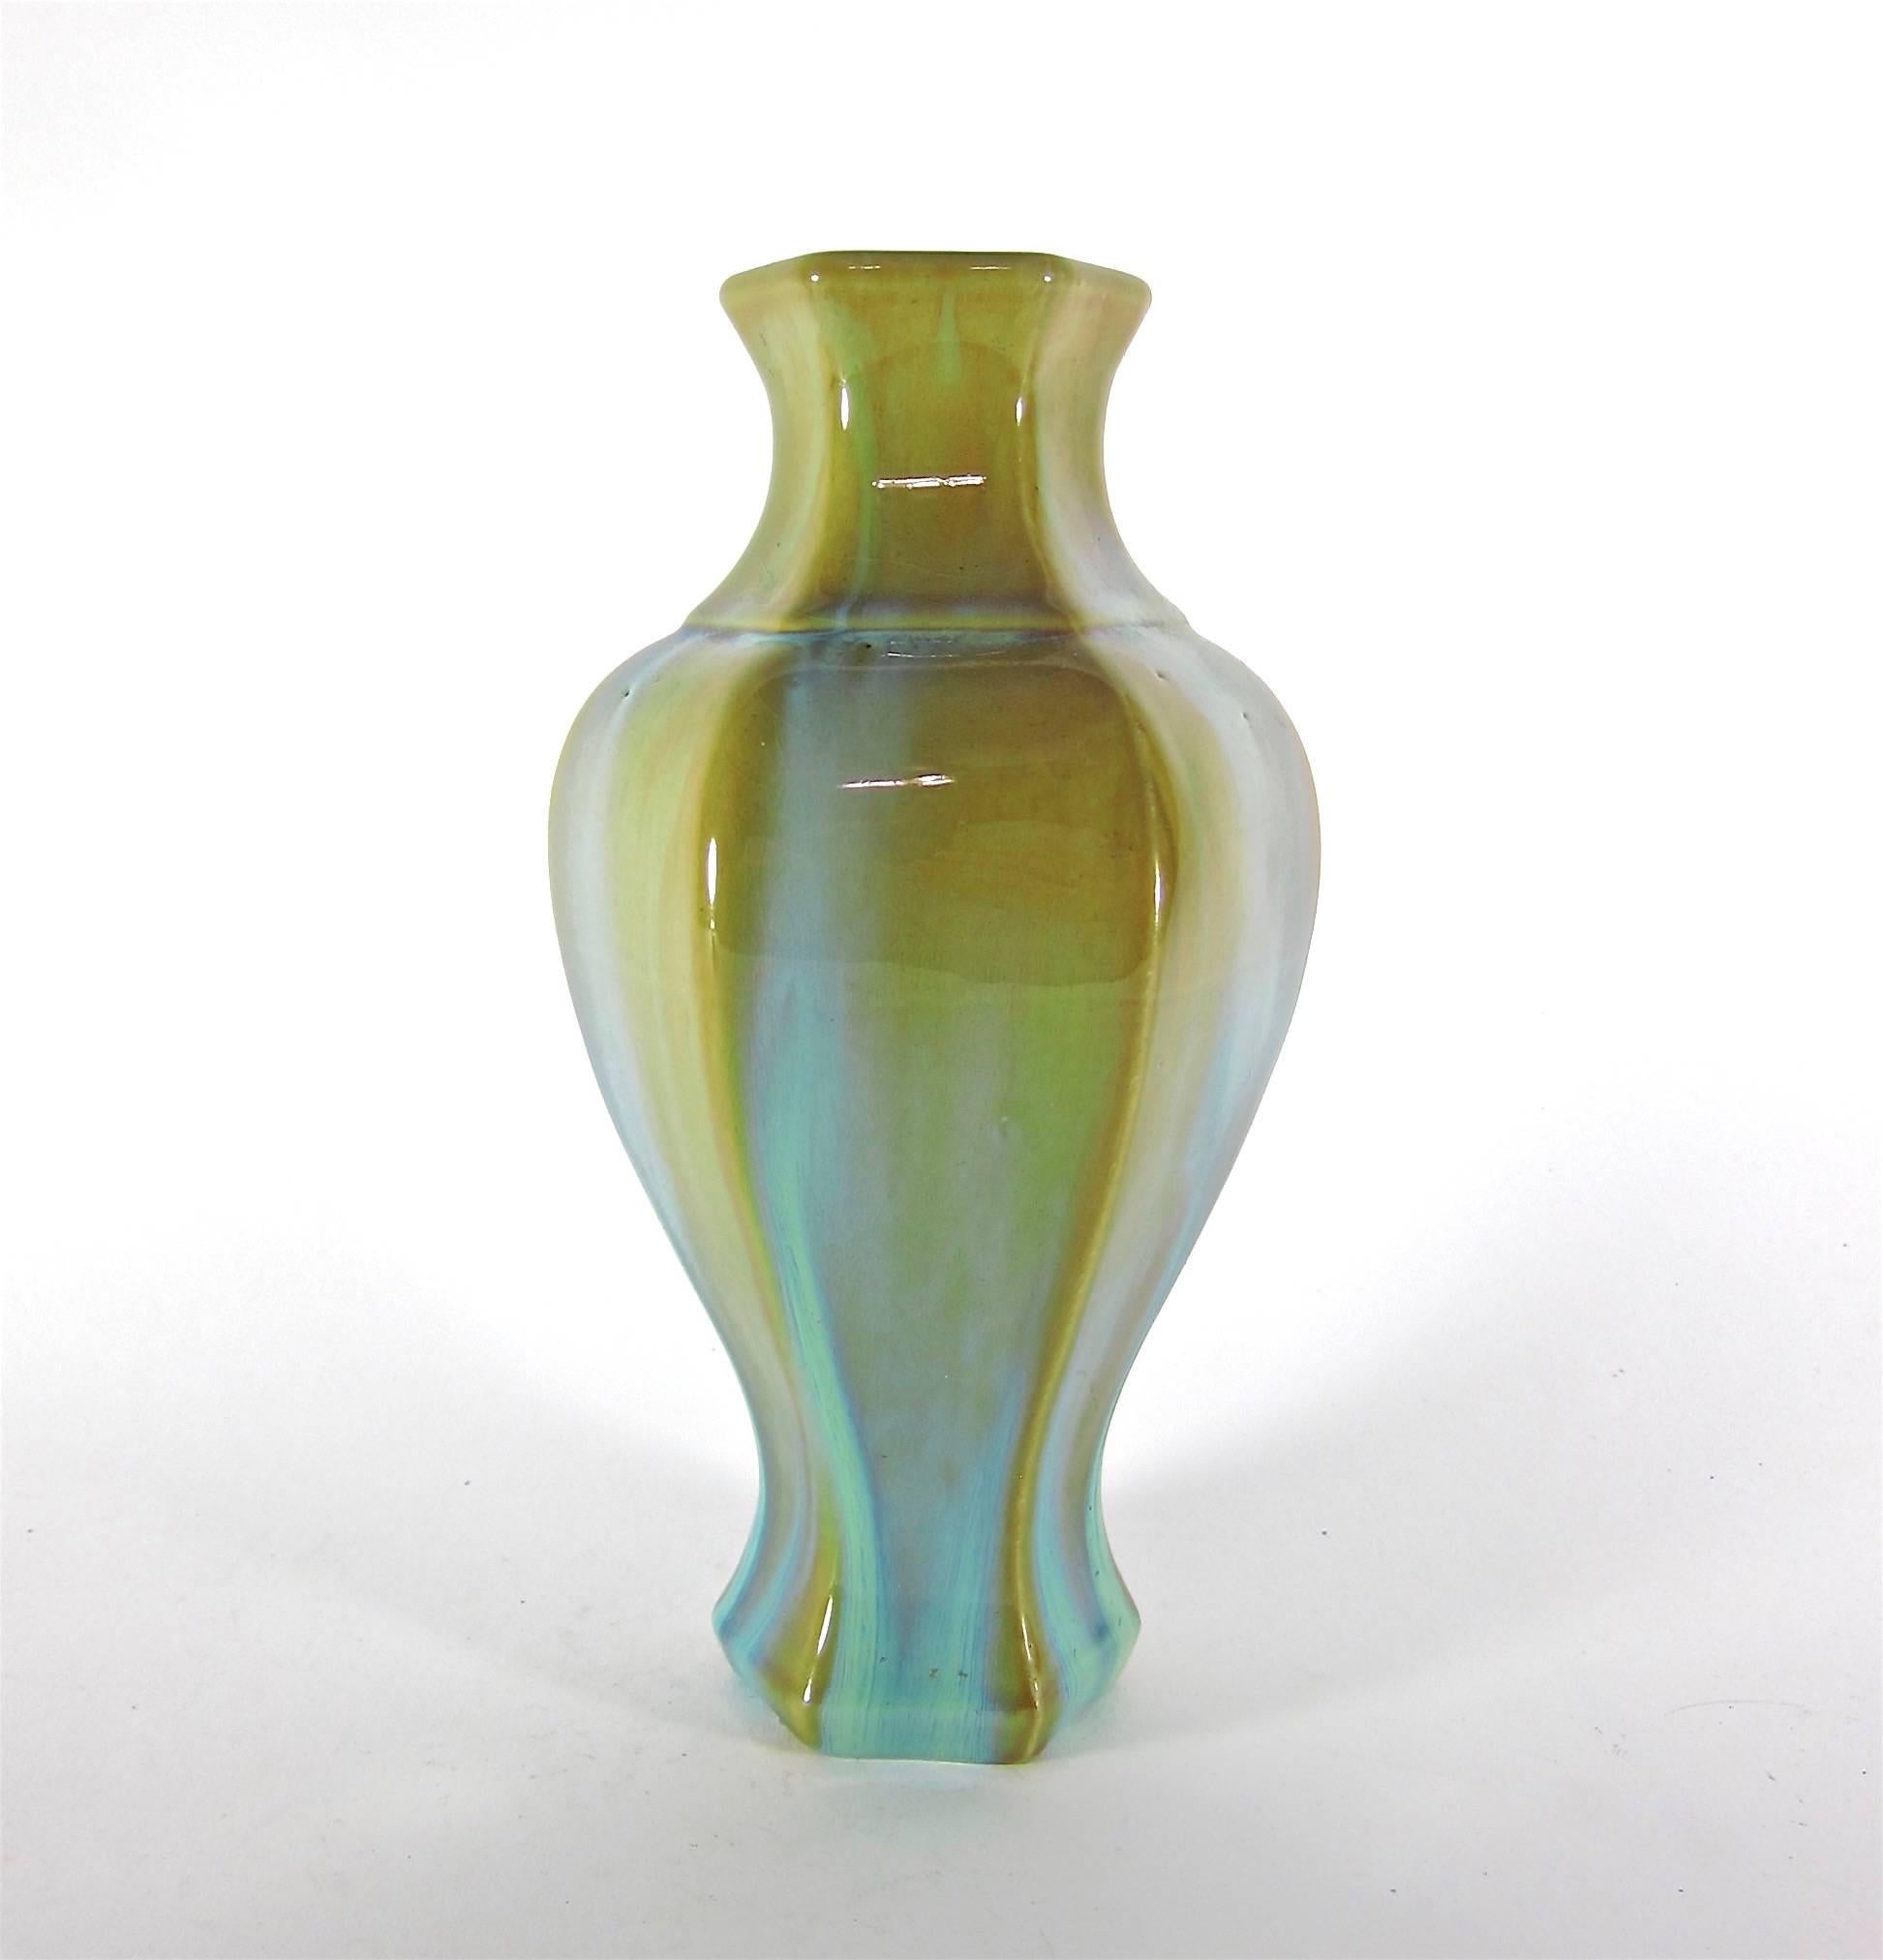 Vintage Arts and Crafts Fulper Pottery Vase with Green Flambe Glaze, circa 1920s 1